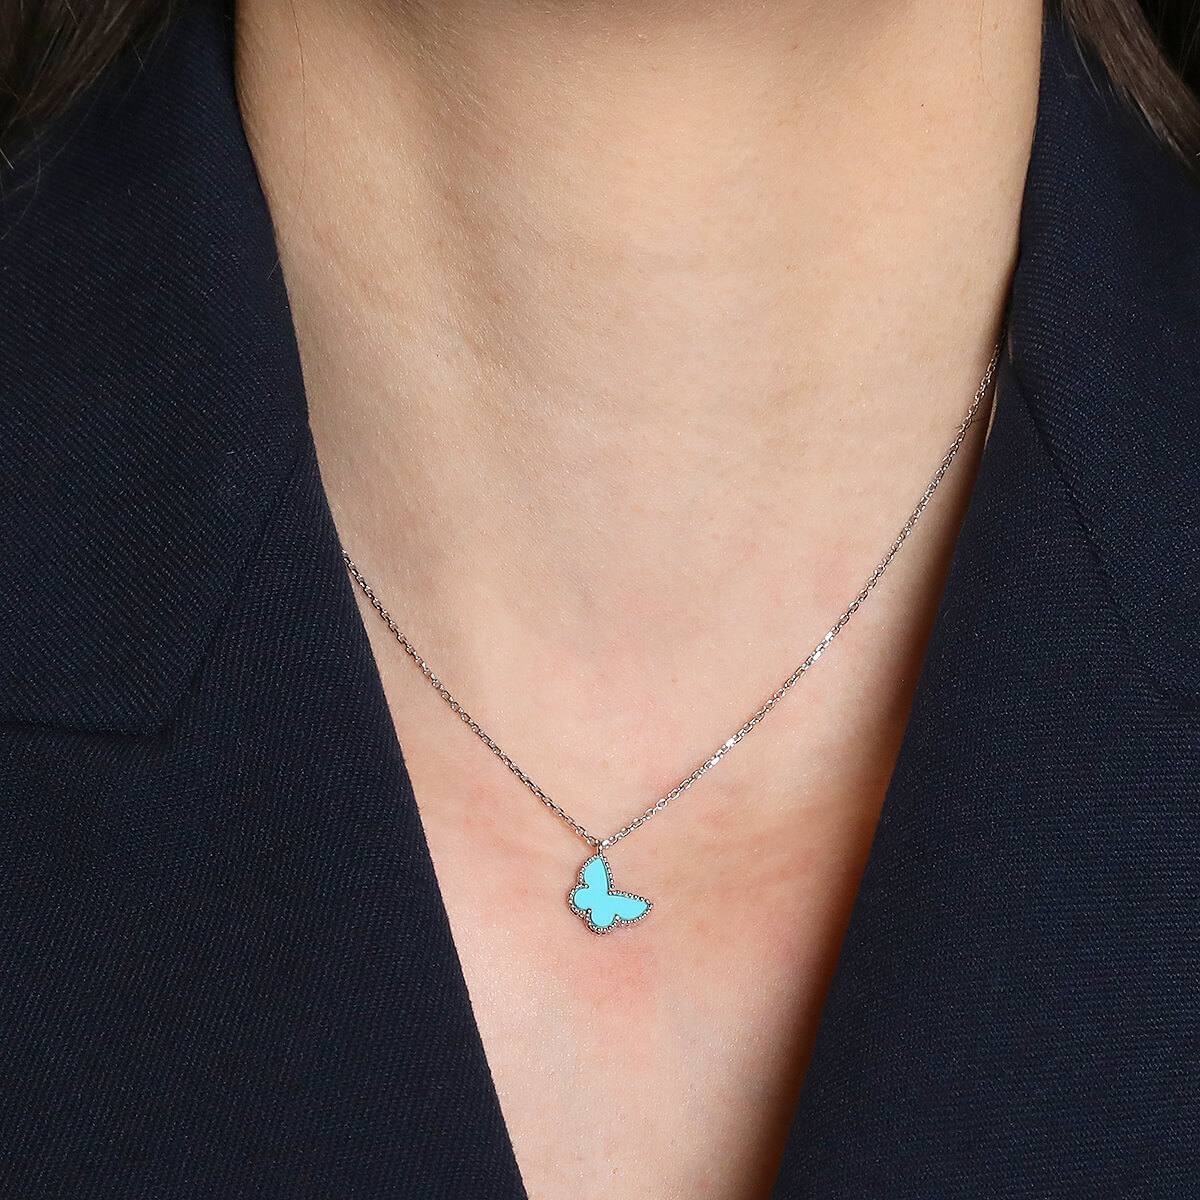 VAN CLEEF & ARPELS Turquoise Vintage Alhambra Pendant Necklace 18k Yellow  Gold | Dearluxe